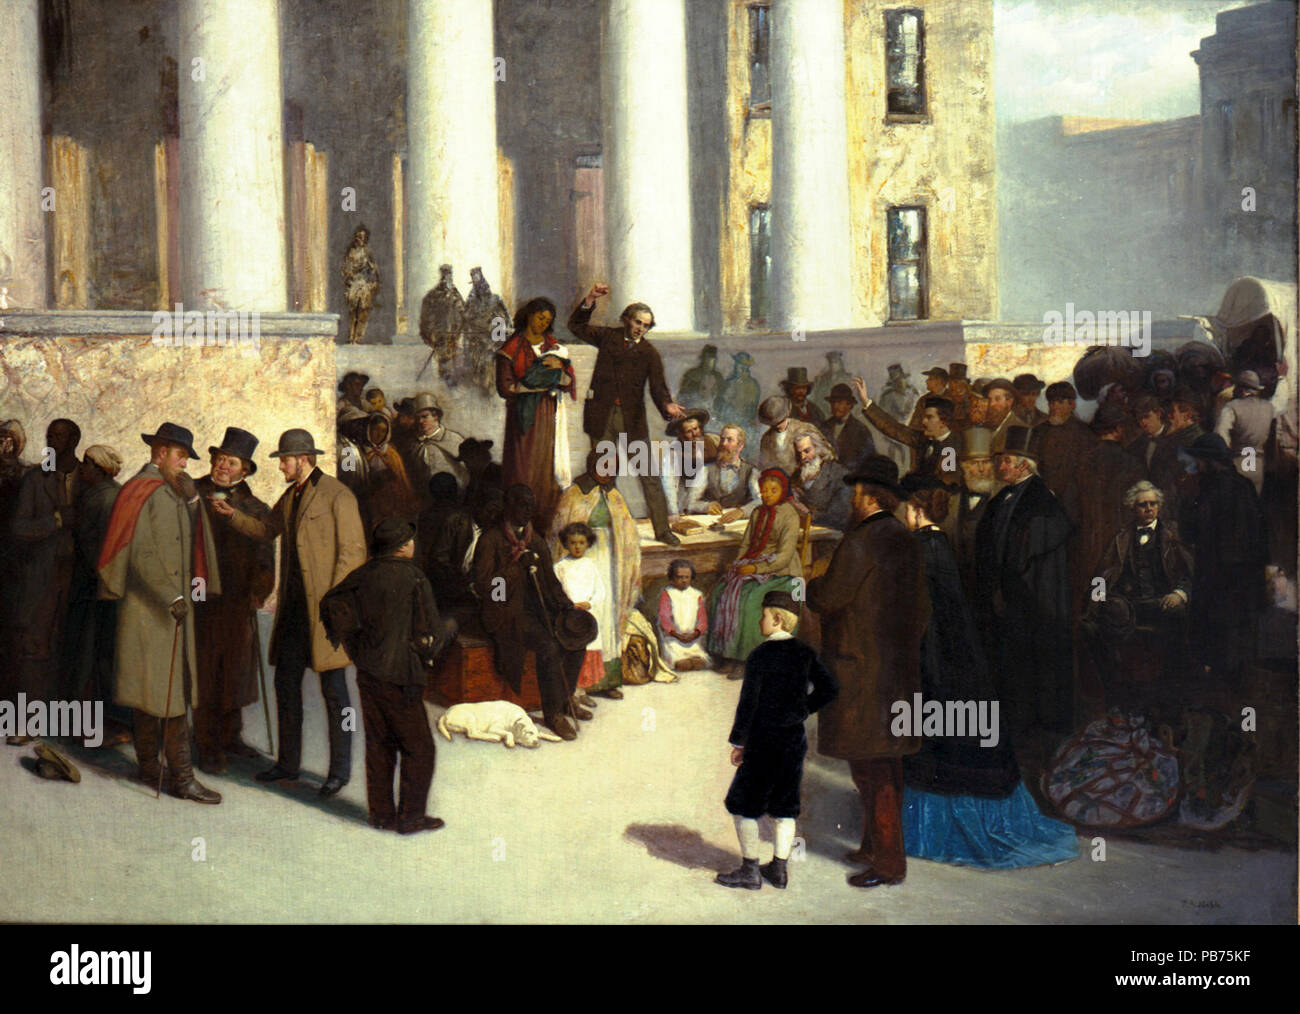 . English: Oil painting 'The Last Sale of Slaves' by Thomas Satterwhite Noble. The image is of a scene on St. Louis Court House steps, January 1, 1861, when a group of abolitionists bid deliberately low to undermine the practice of selling slaves Title: Painting 'The Last Sale of Slaves' by Thomas Satterwhite Noble . circa 1880 1154 Painting &quot;The Last Sale of Slaves&quot; by Thomas Satterwhite Noble Stock Photo